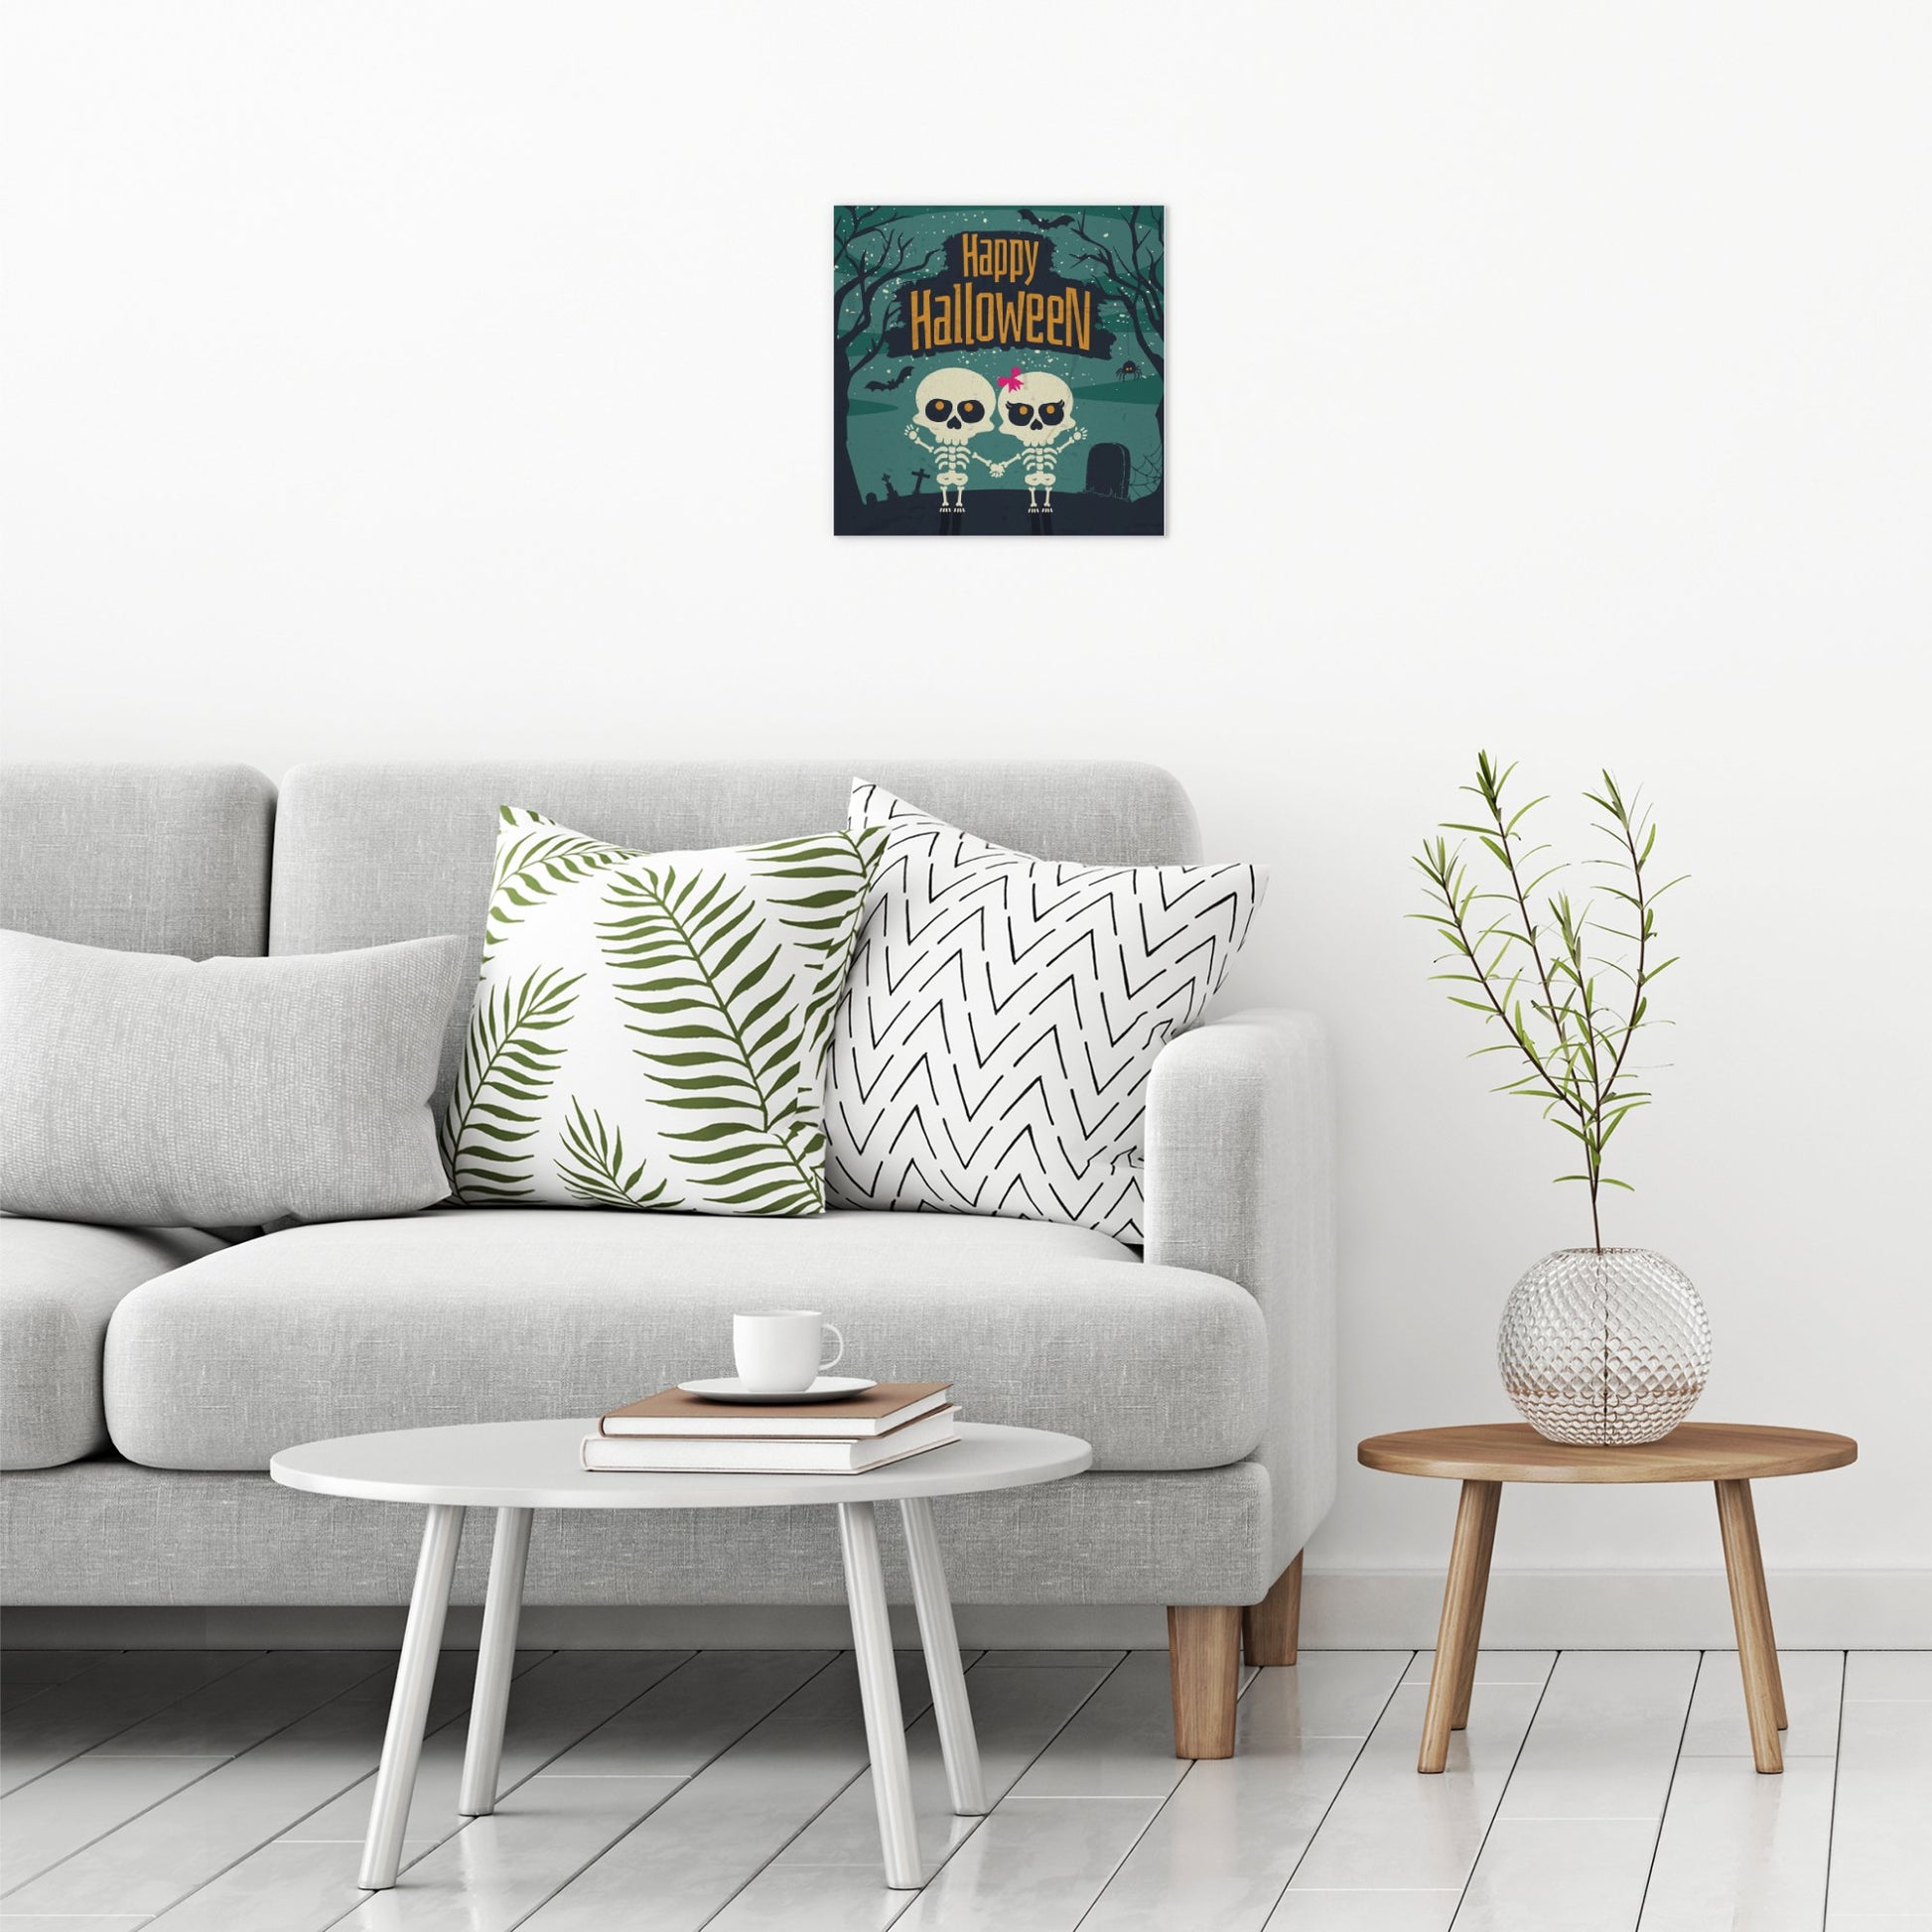 A contemporary modern room view showing a medium size metal art poster display plate with printed design of a Happy Halloween Cute Skeletons